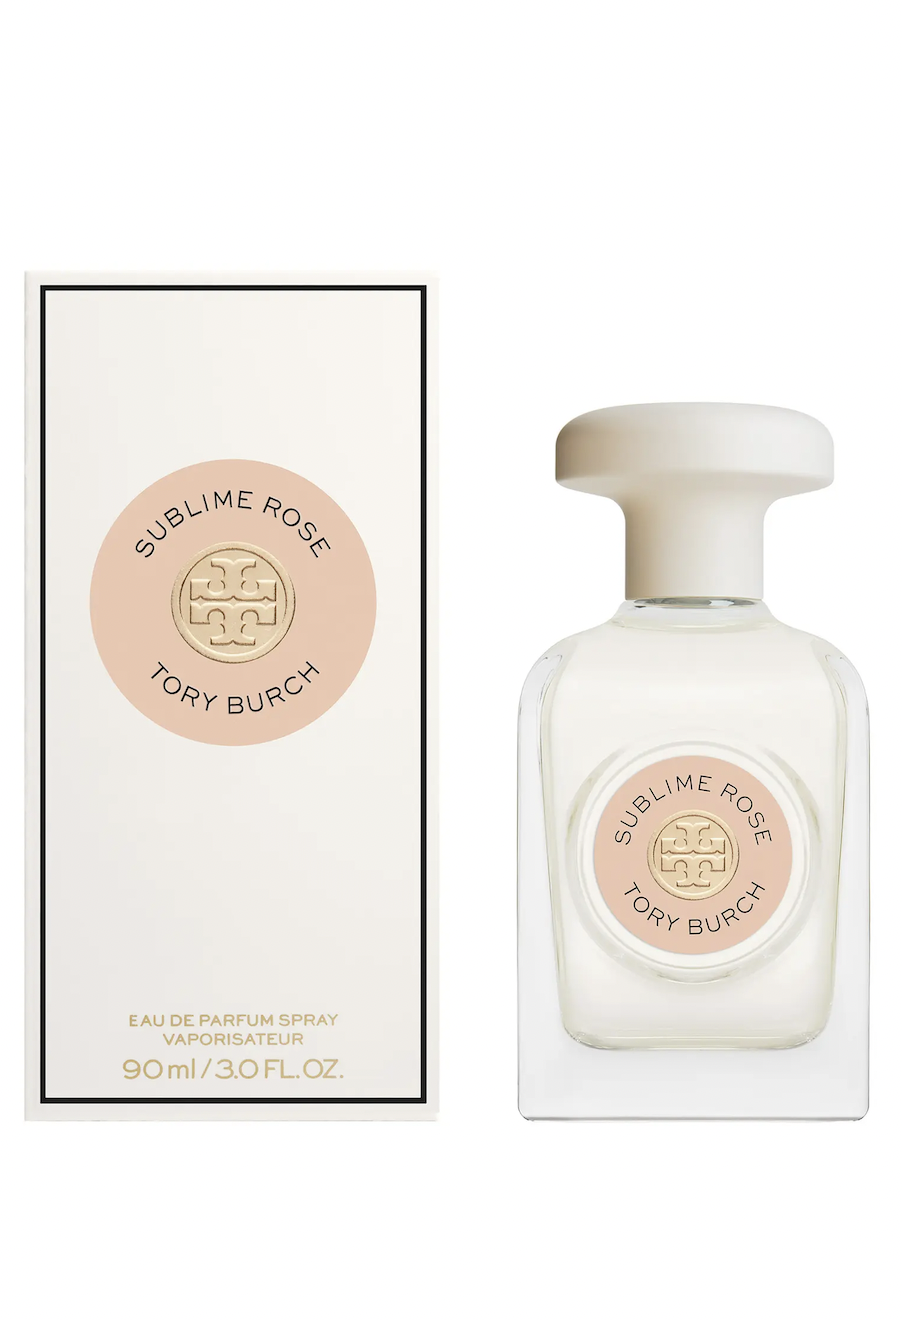 Sublime Rose by Tory Burch - ₱6,650.00